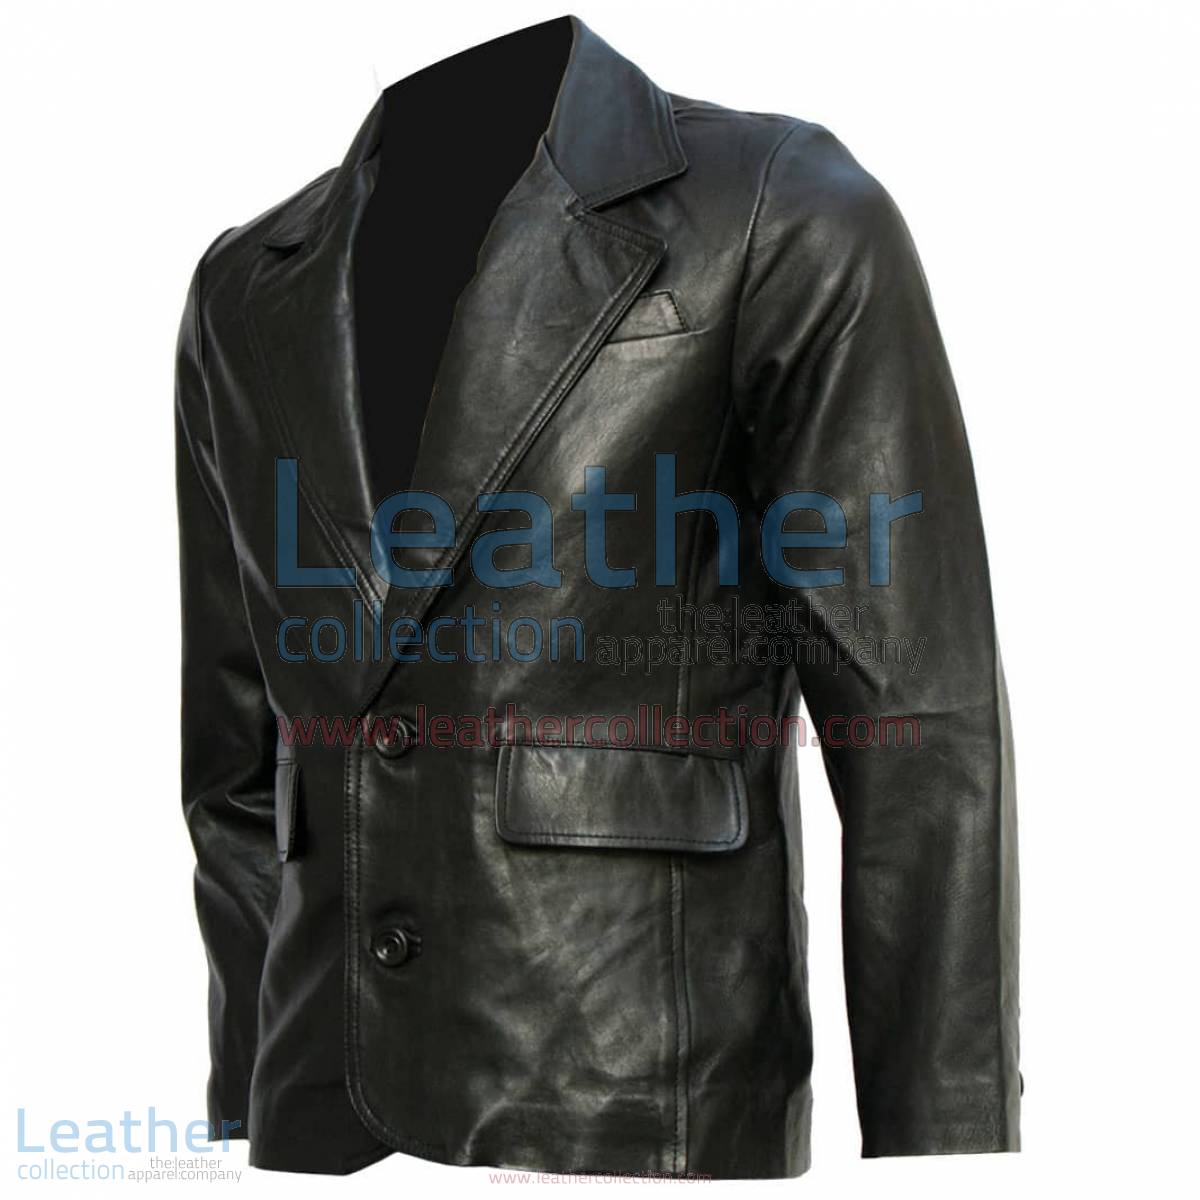 Mission Impossible Tom Cruise Black Leather Blazer